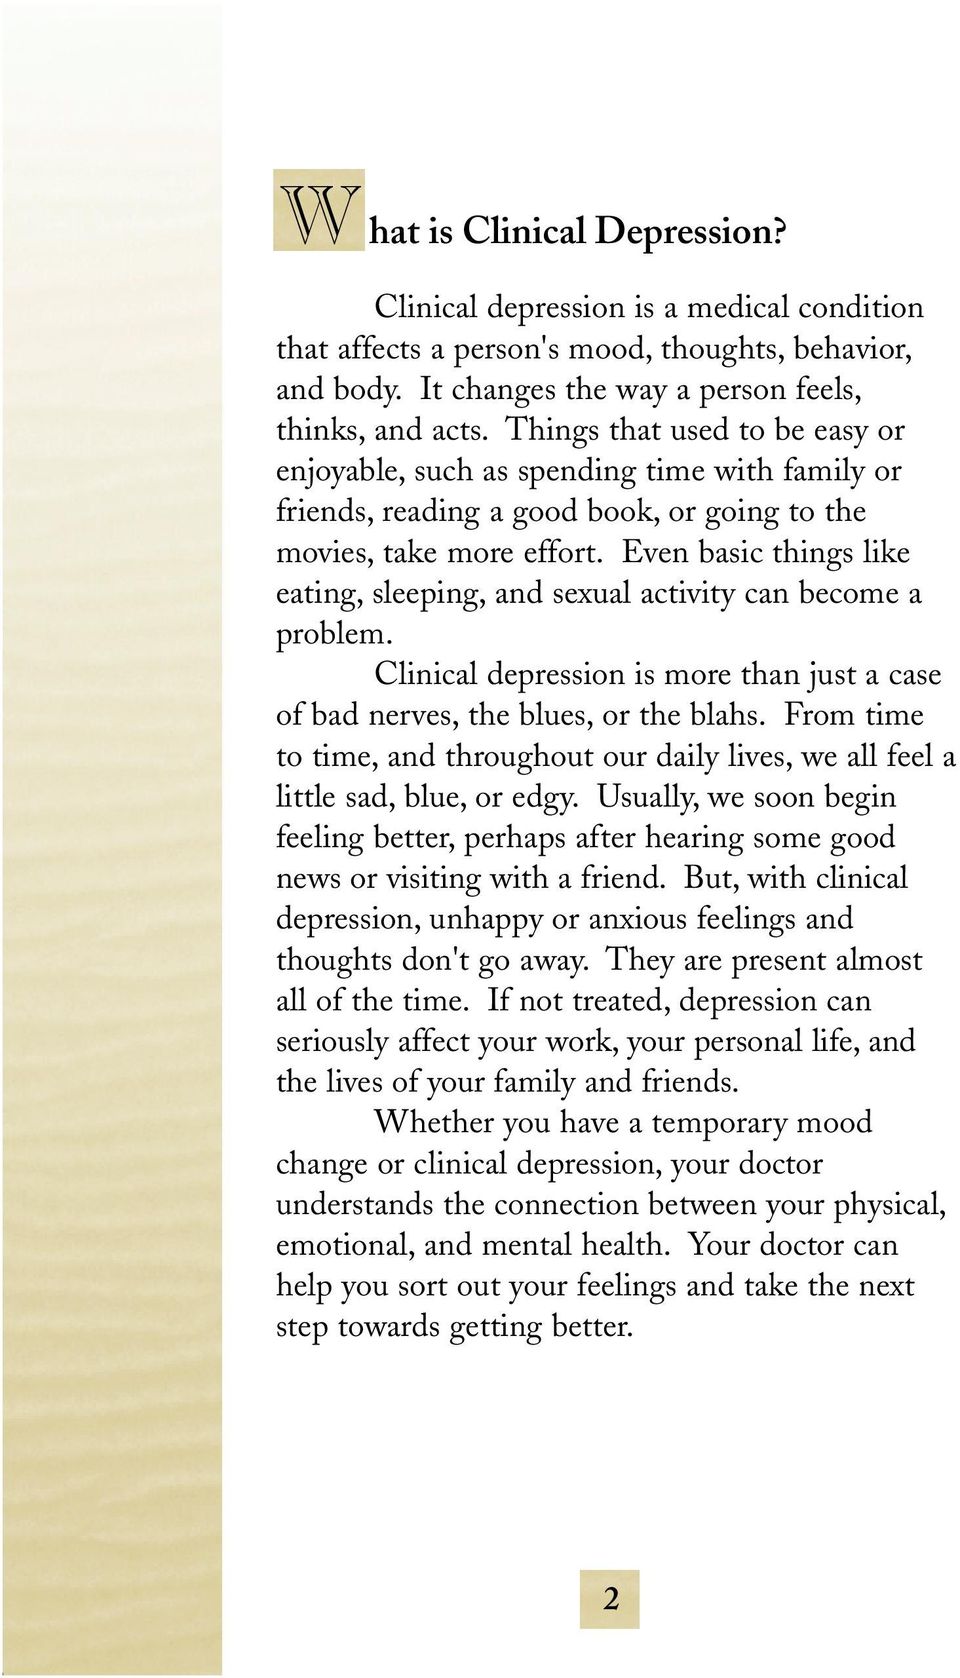 Even basic things like eating, sleeping, and sexual activity can become a problem. Clinical depression is more than just a case of bad nerves, the blues, or the blahs.